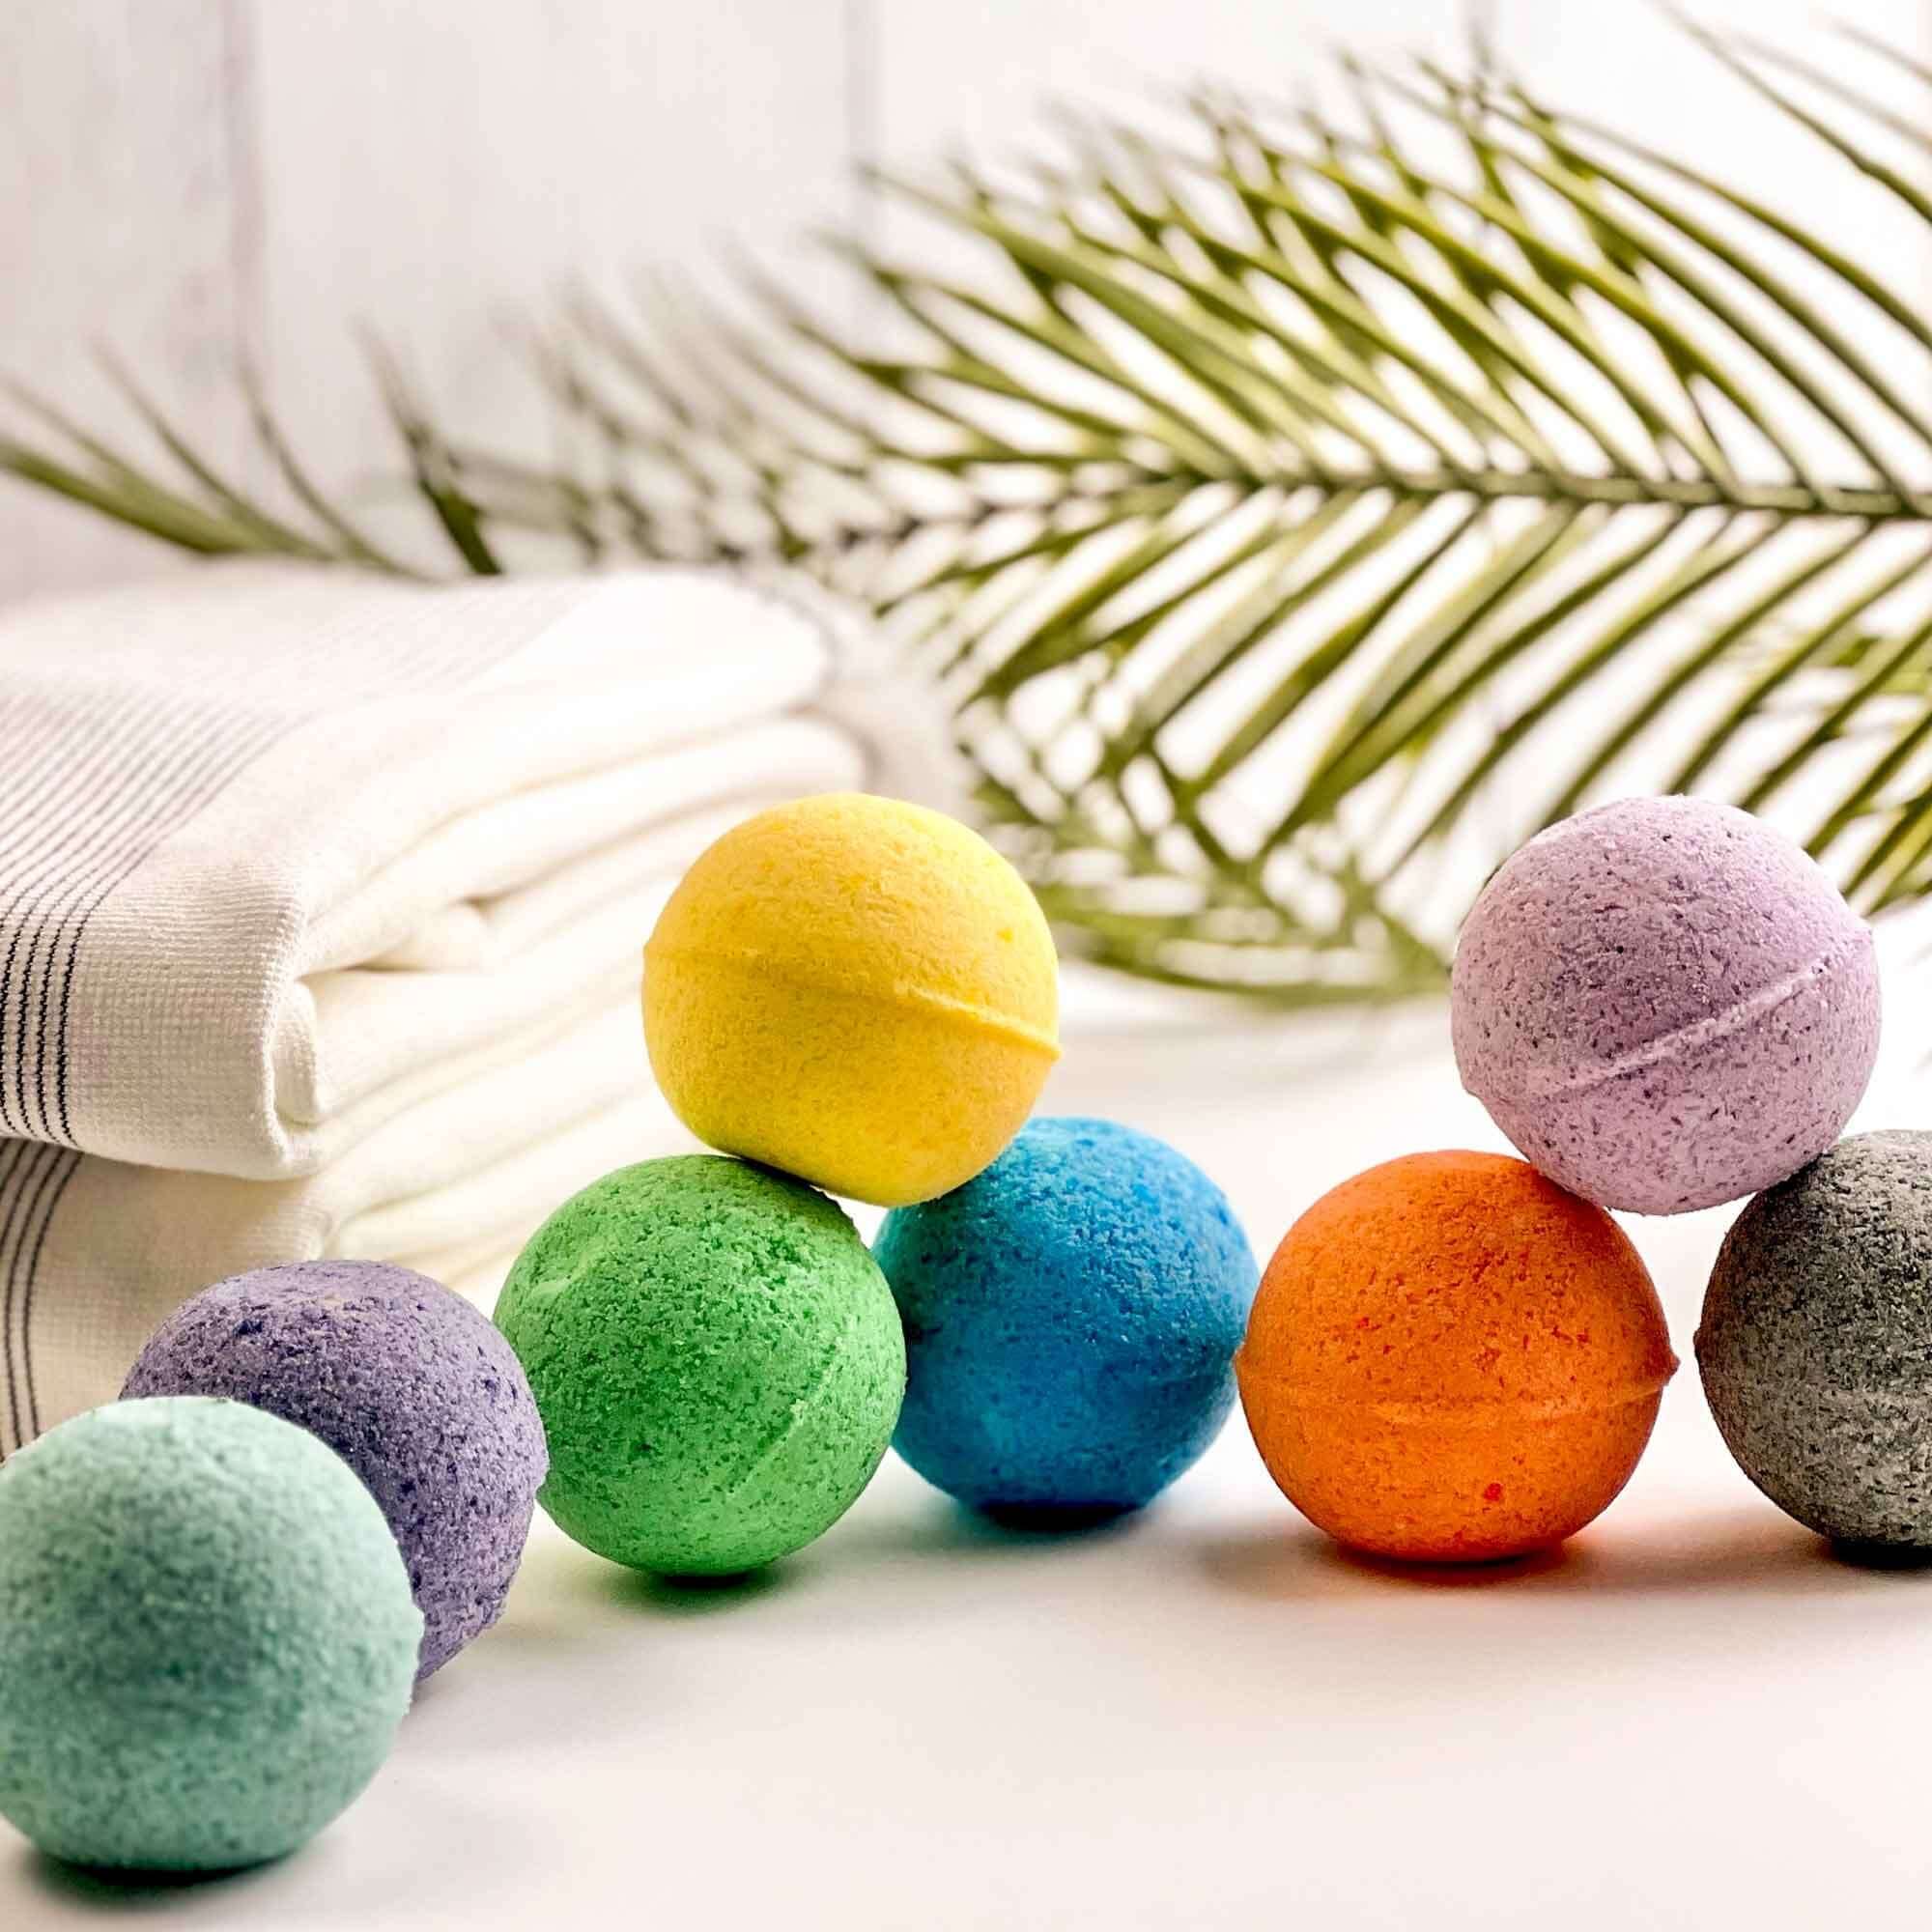 Indulge in a Relaxing Day at the Spa with our Aromatherapy Bath Bombs